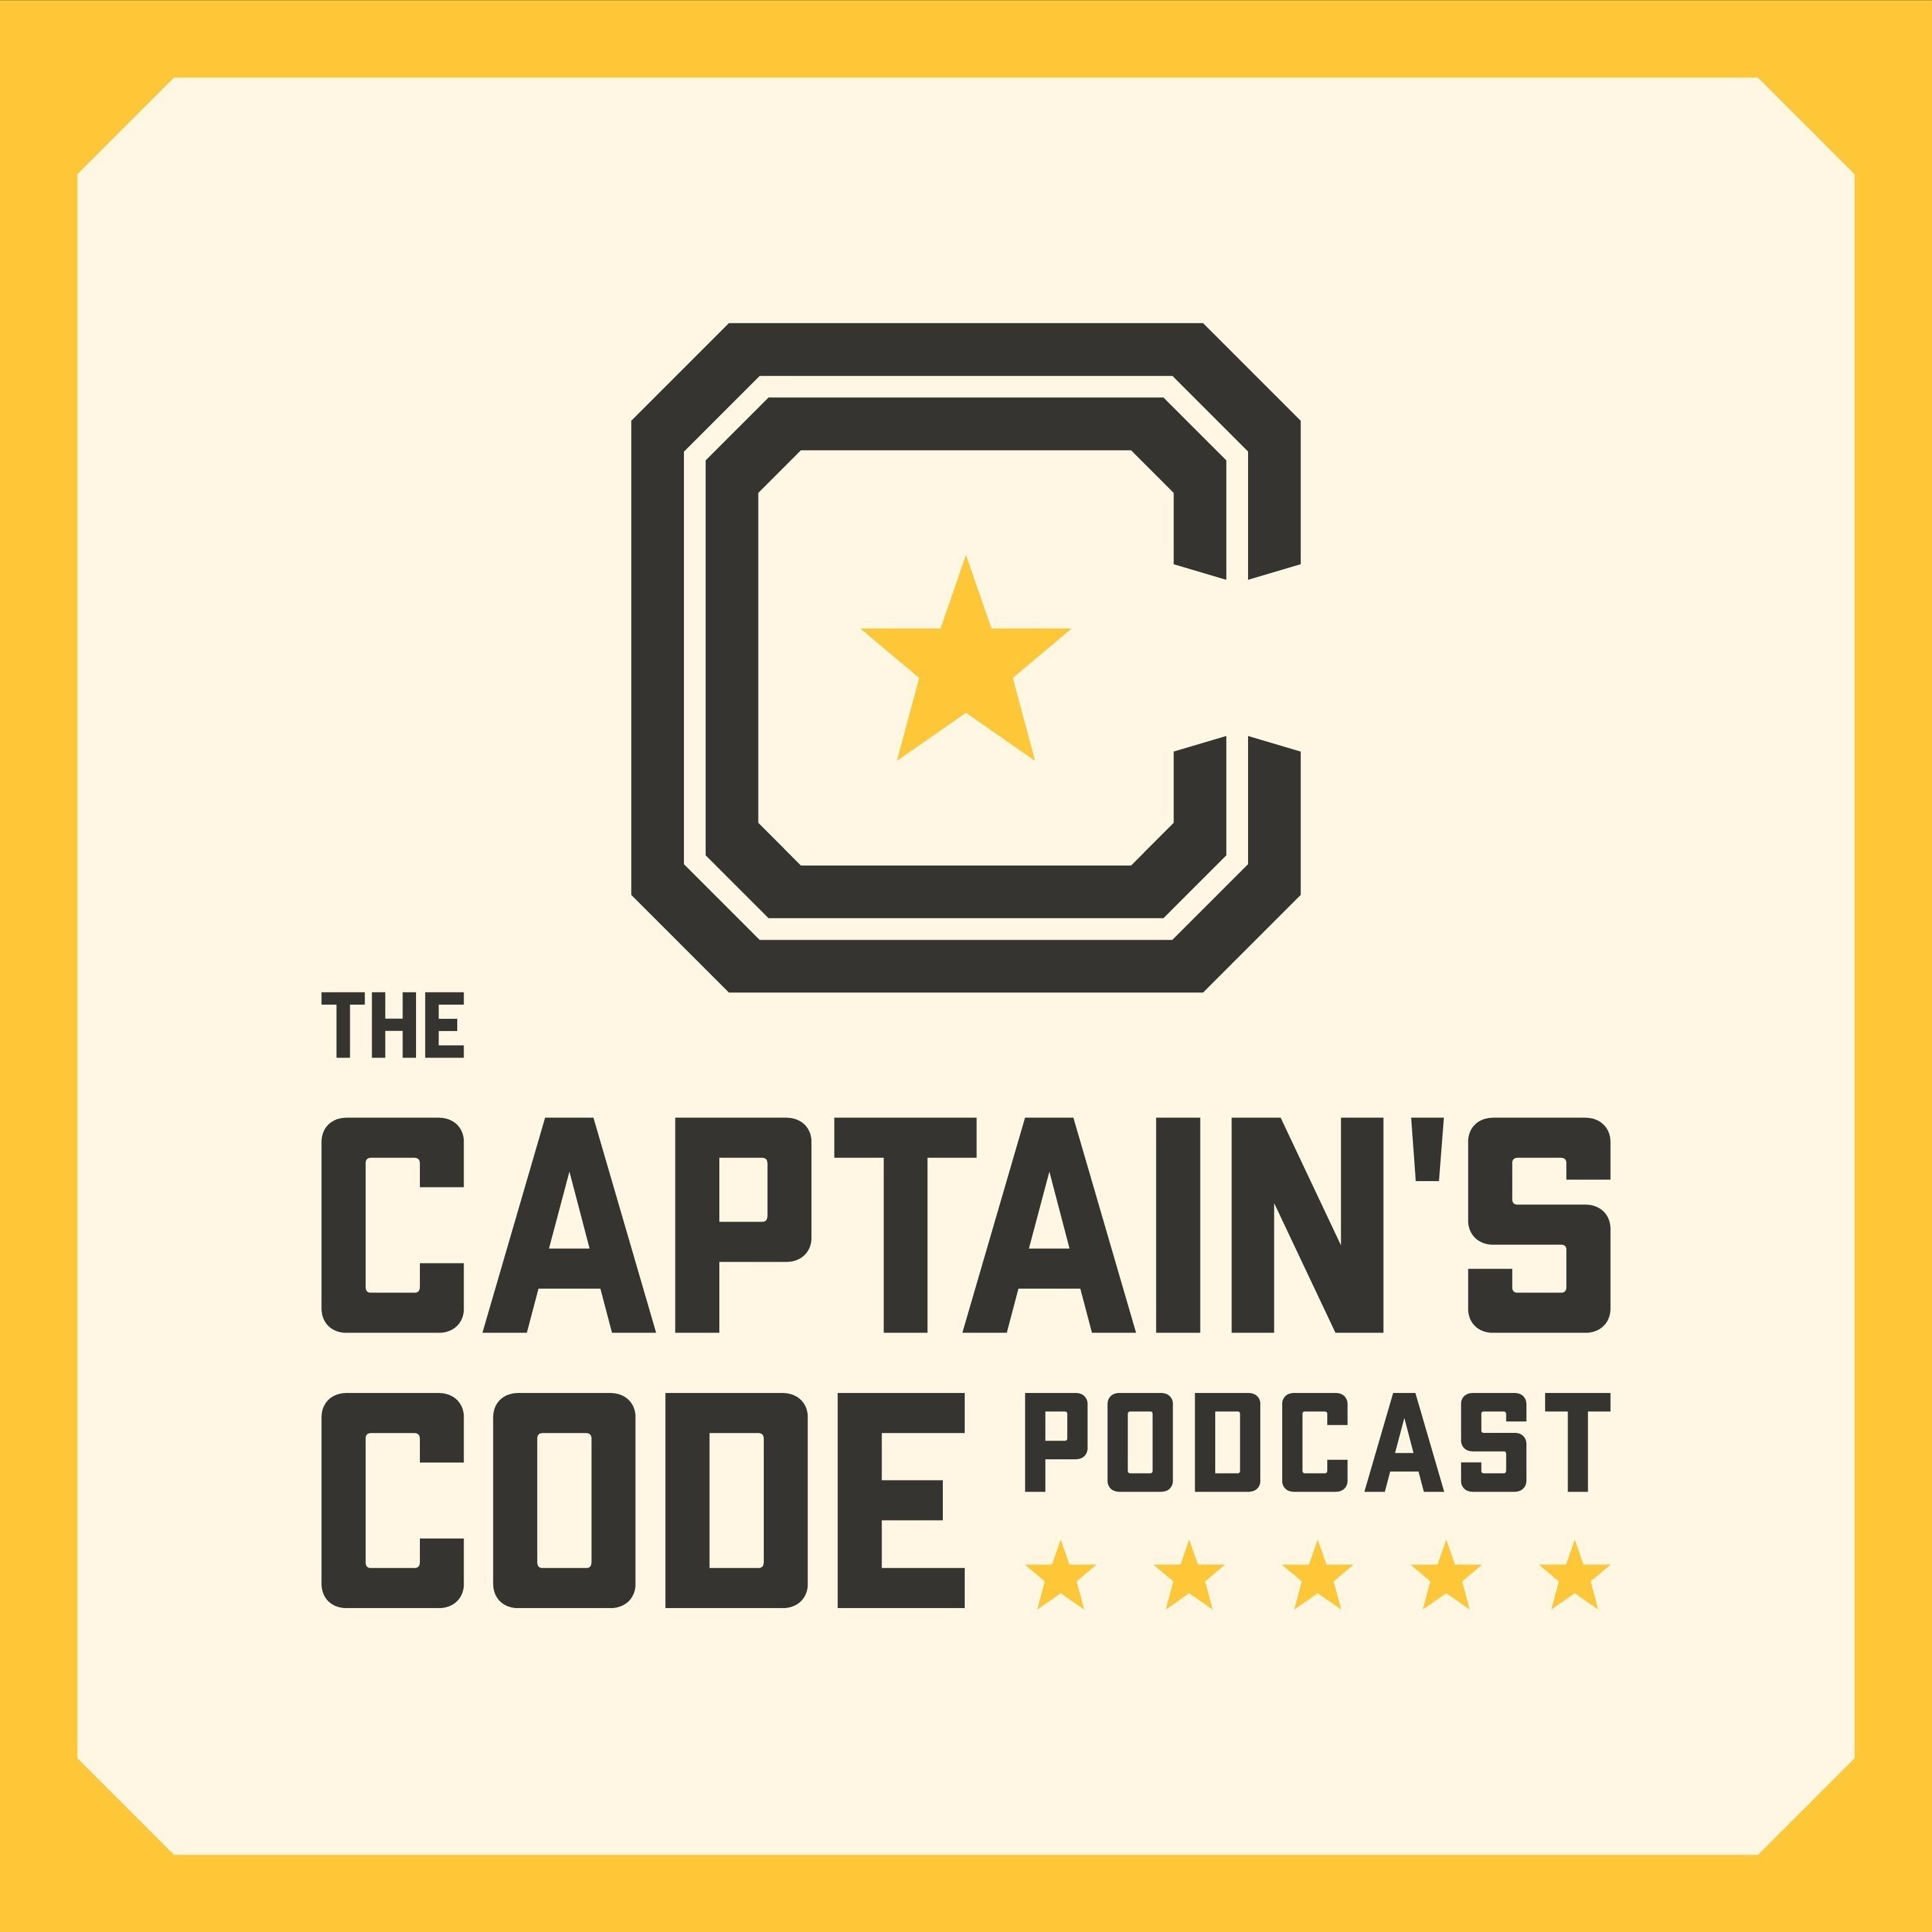 The Captain's Code